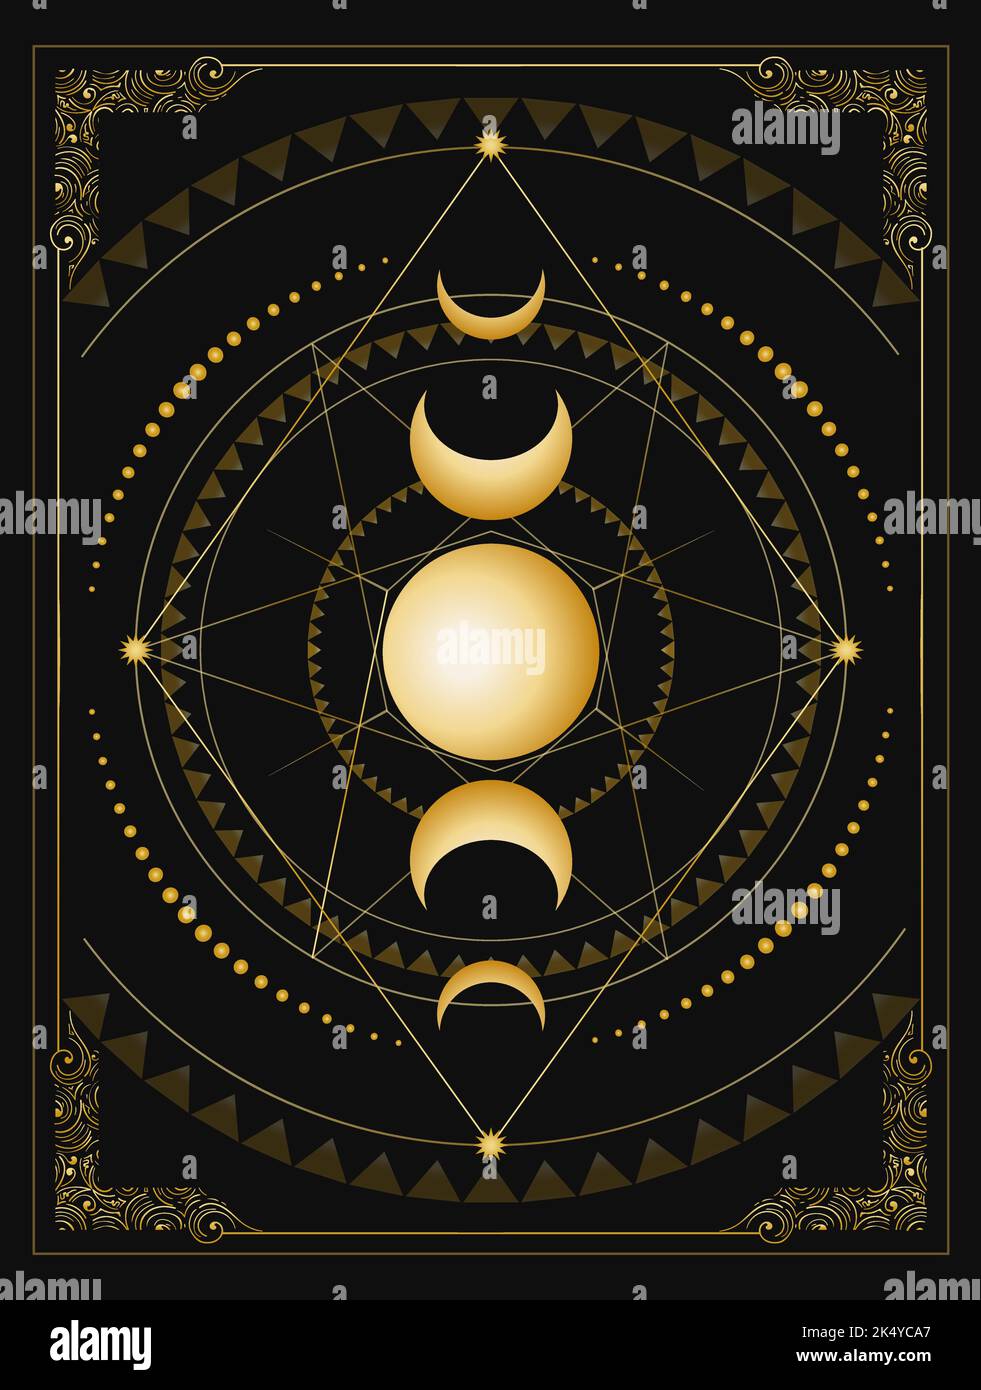 Phases of Moon and Sacred Geometry. Esoteric Medieval emblem isolated on Black Background. Stock Vector